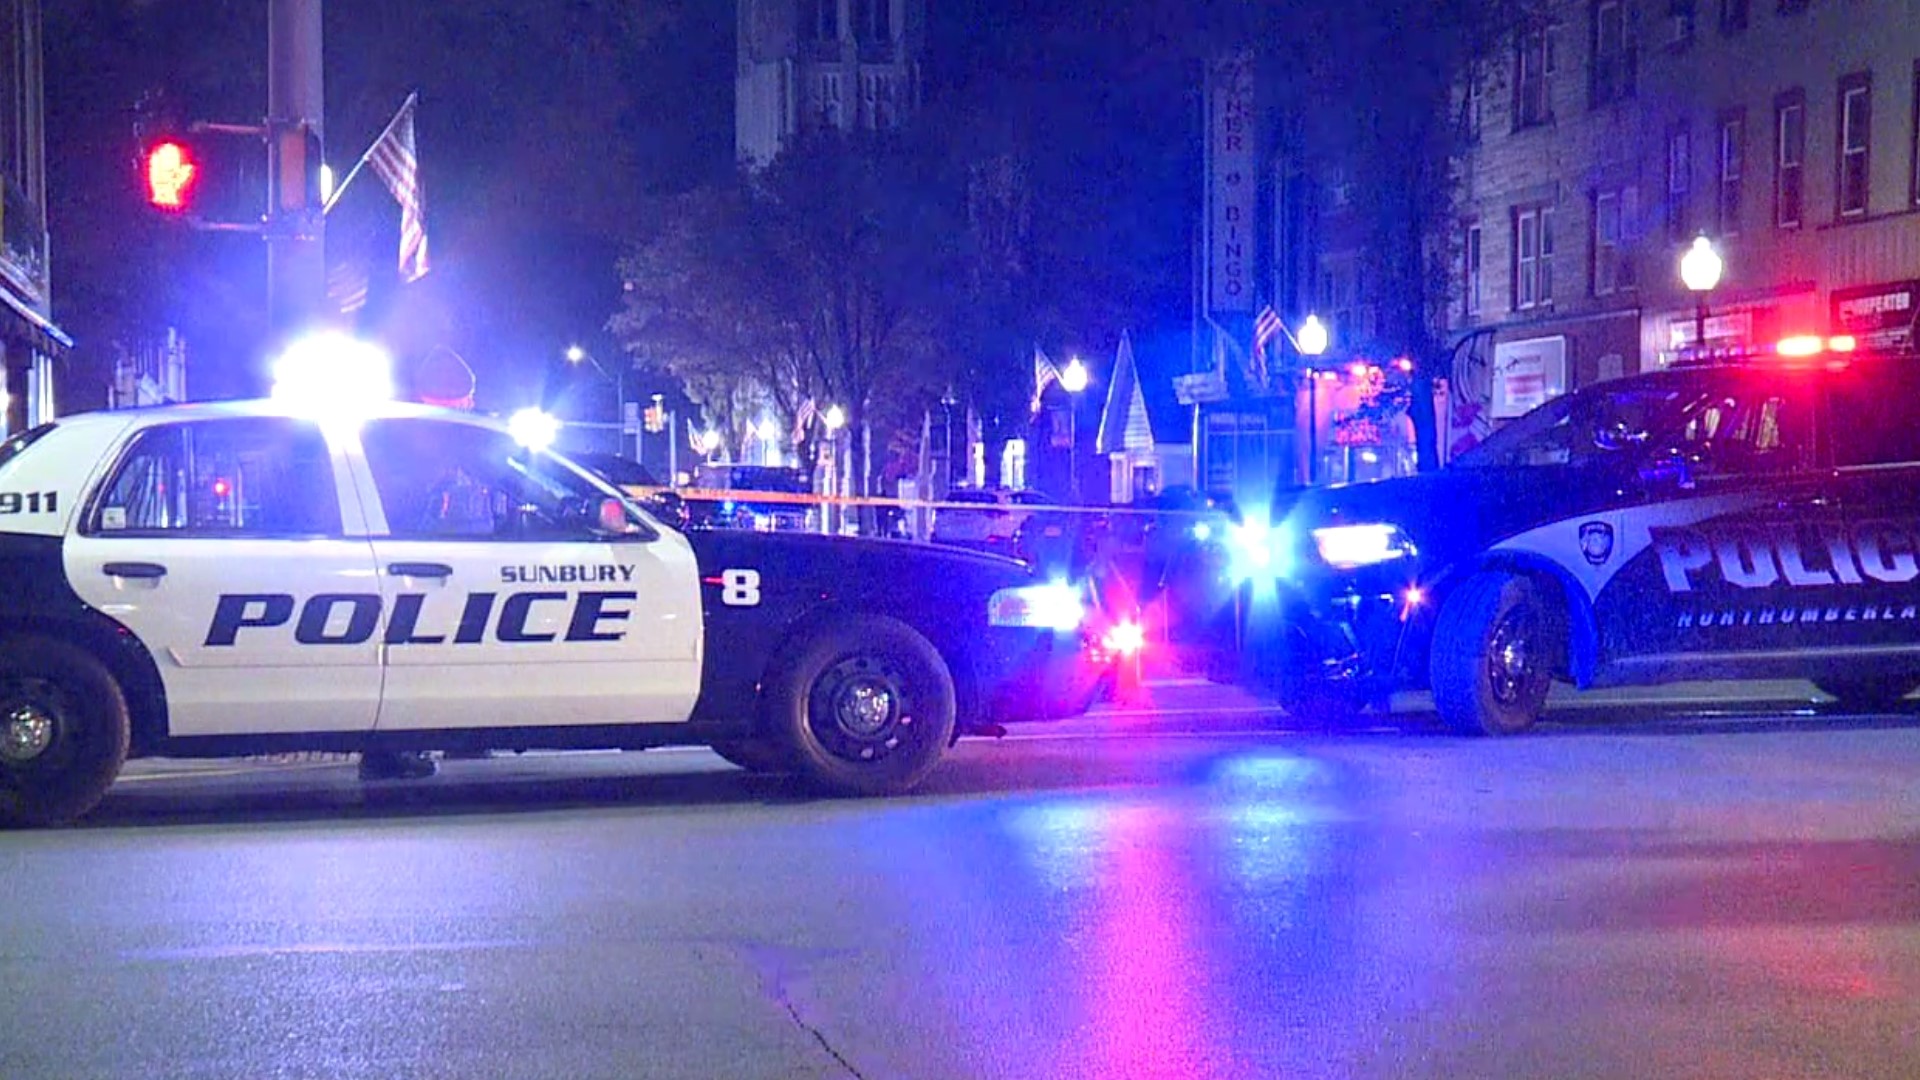 Officers were called to the 400 block of Market Street for a reported shooting.